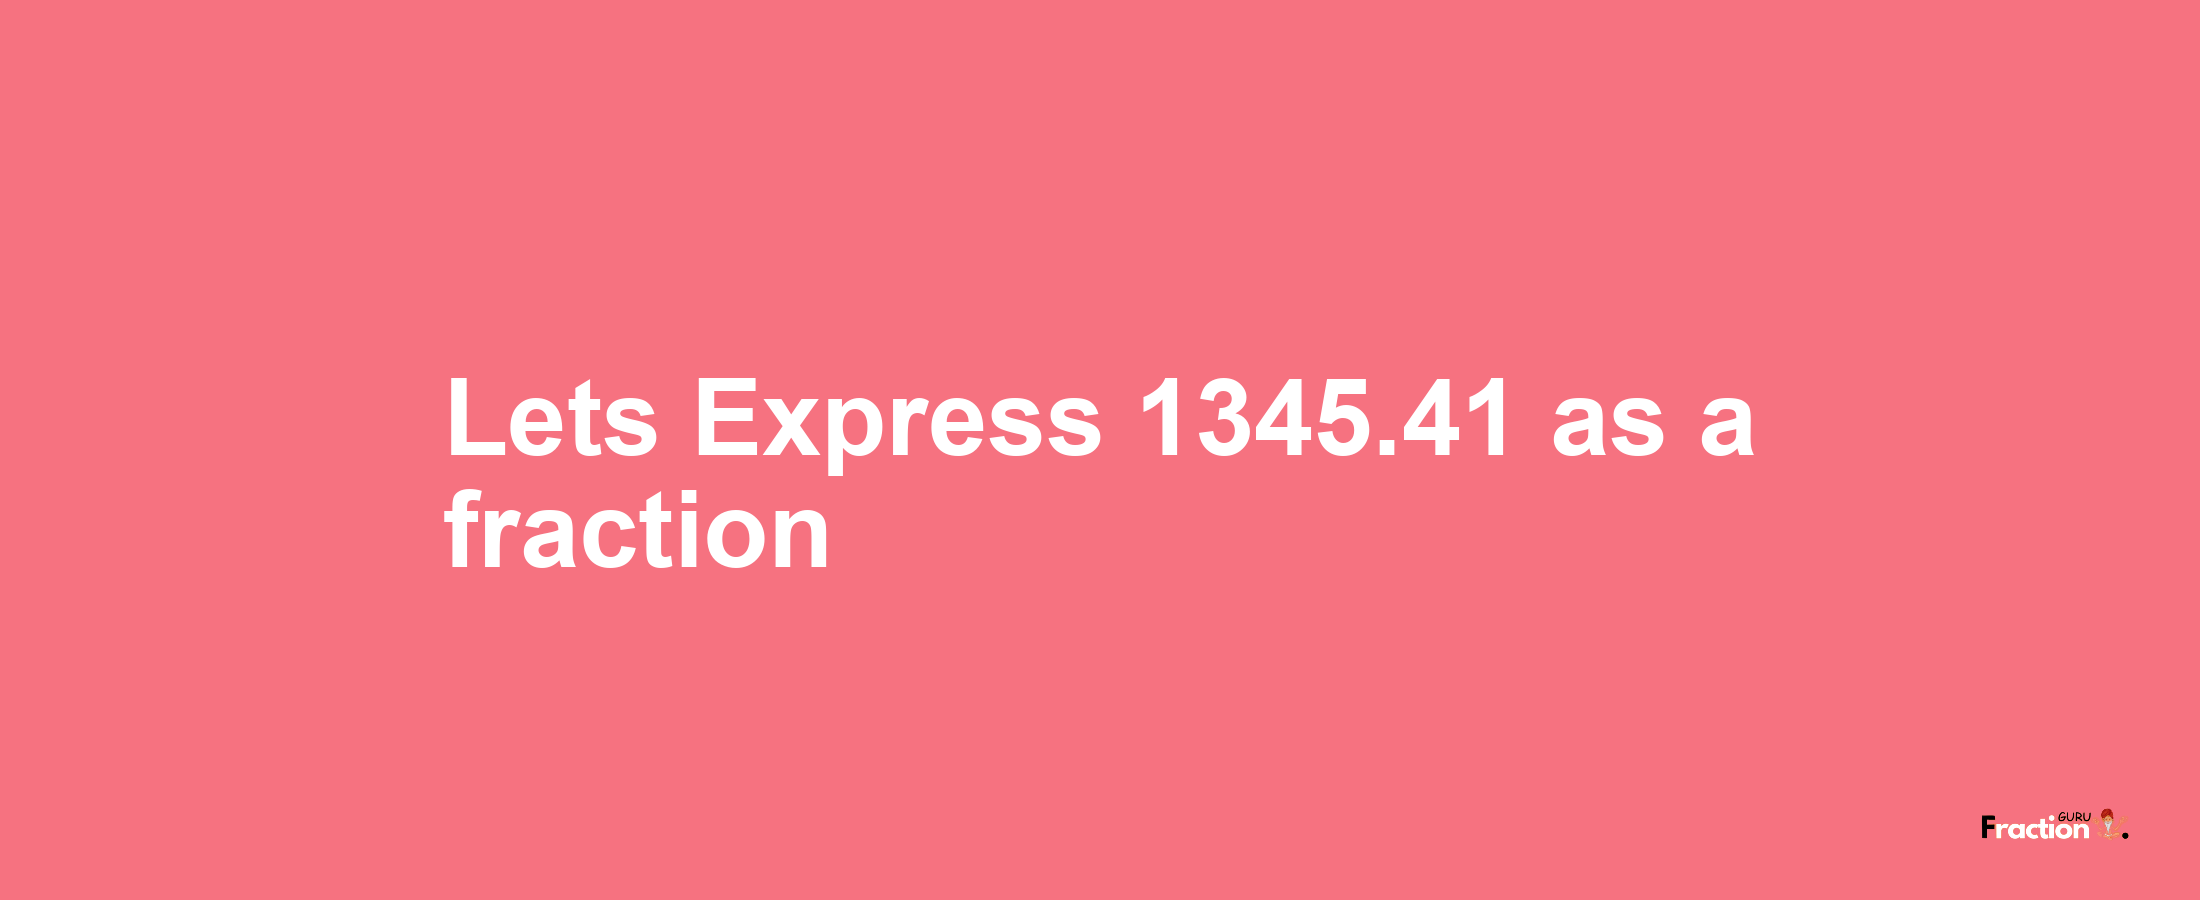 Lets Express 1345.41 as afraction